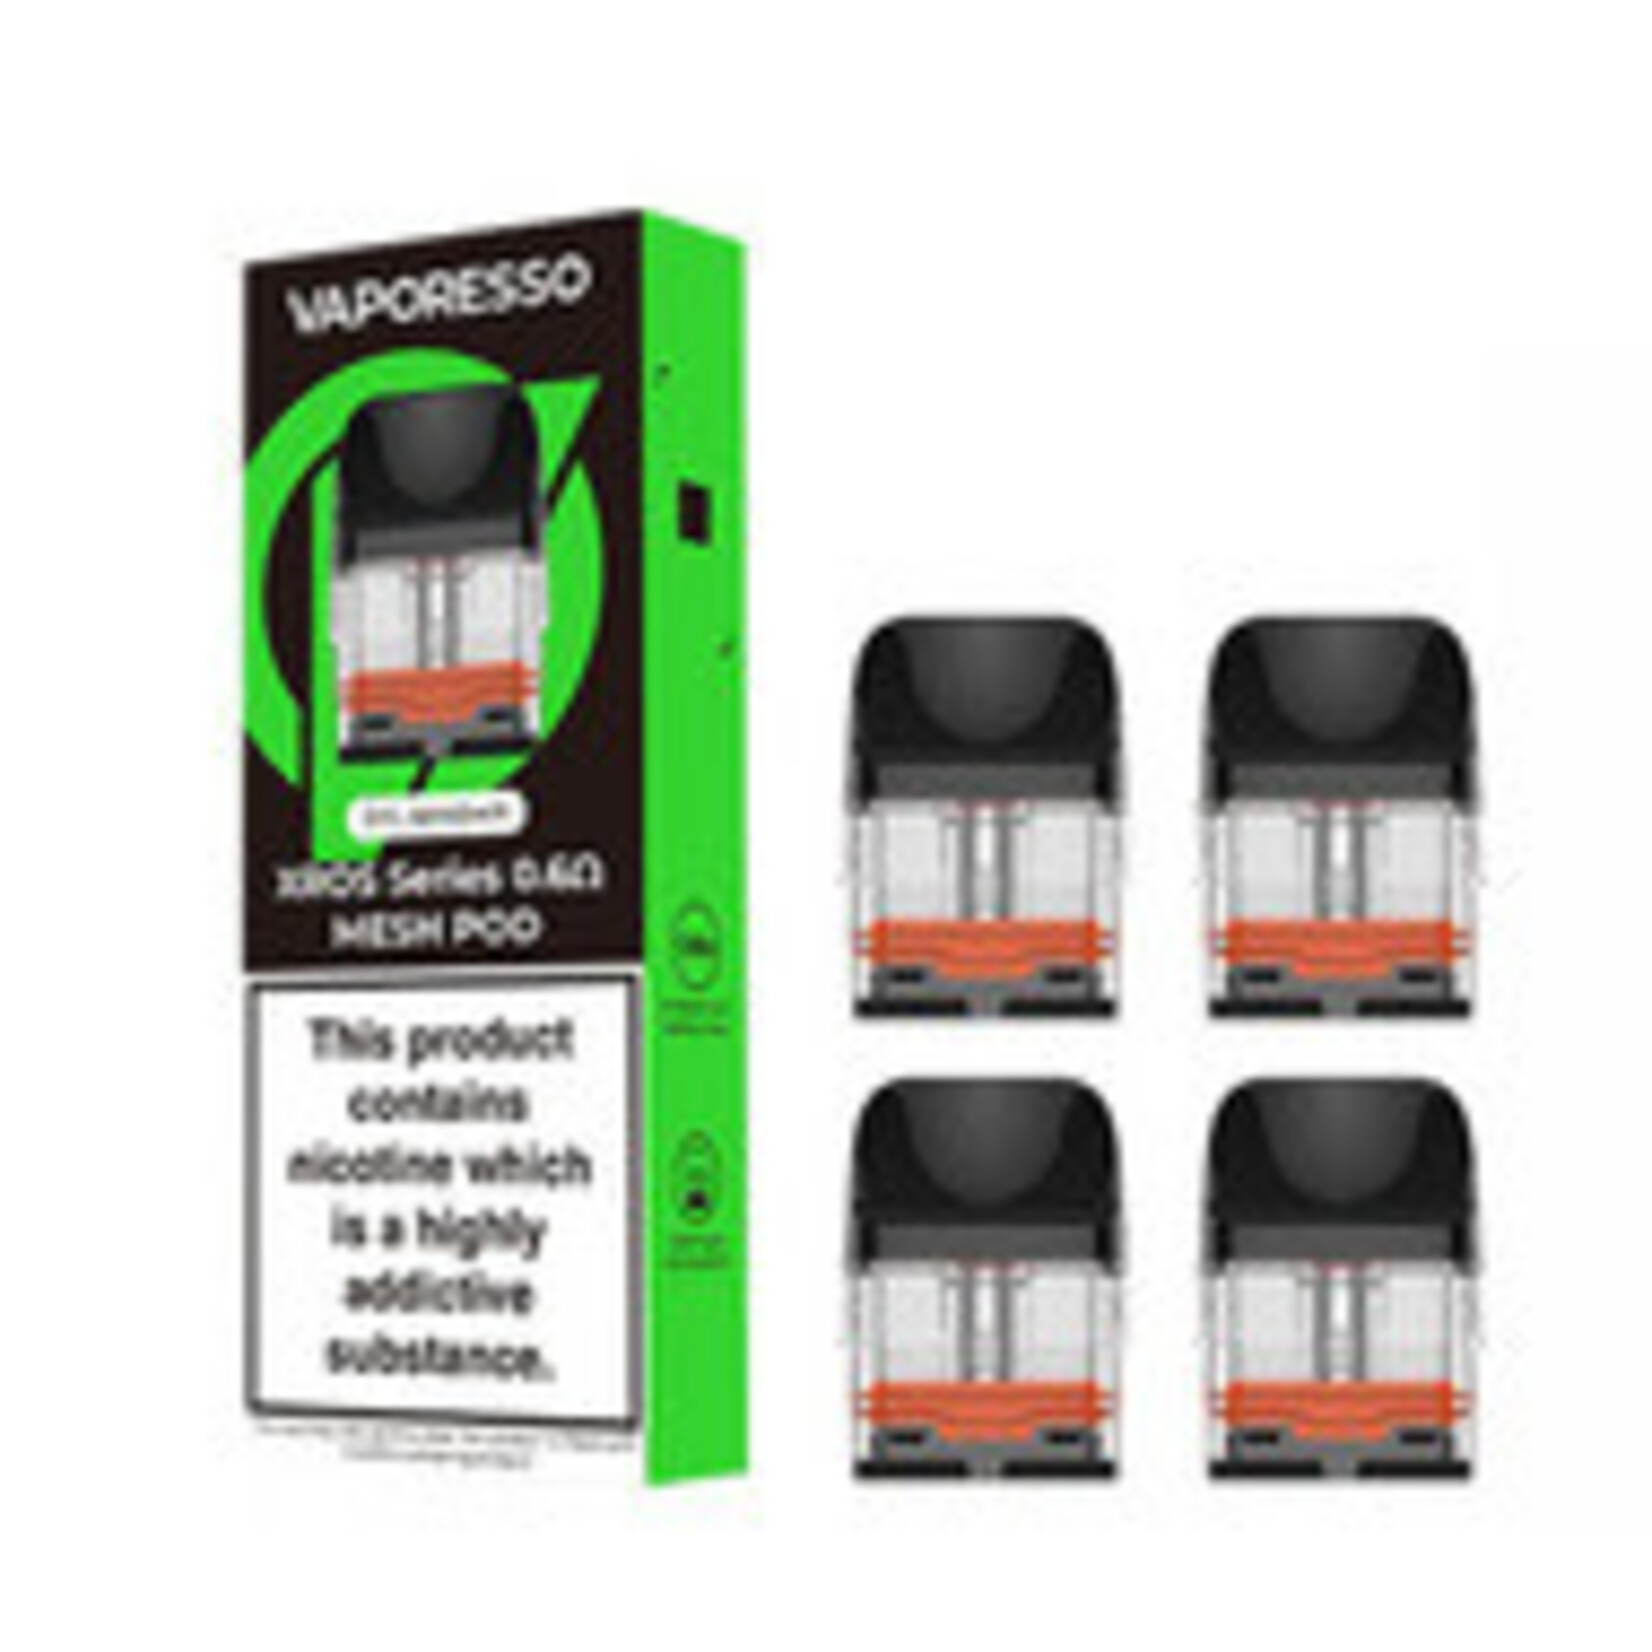 Vaporesso Vaporesso XROS 2ML Refillable Replacement Pods - Pack of 4